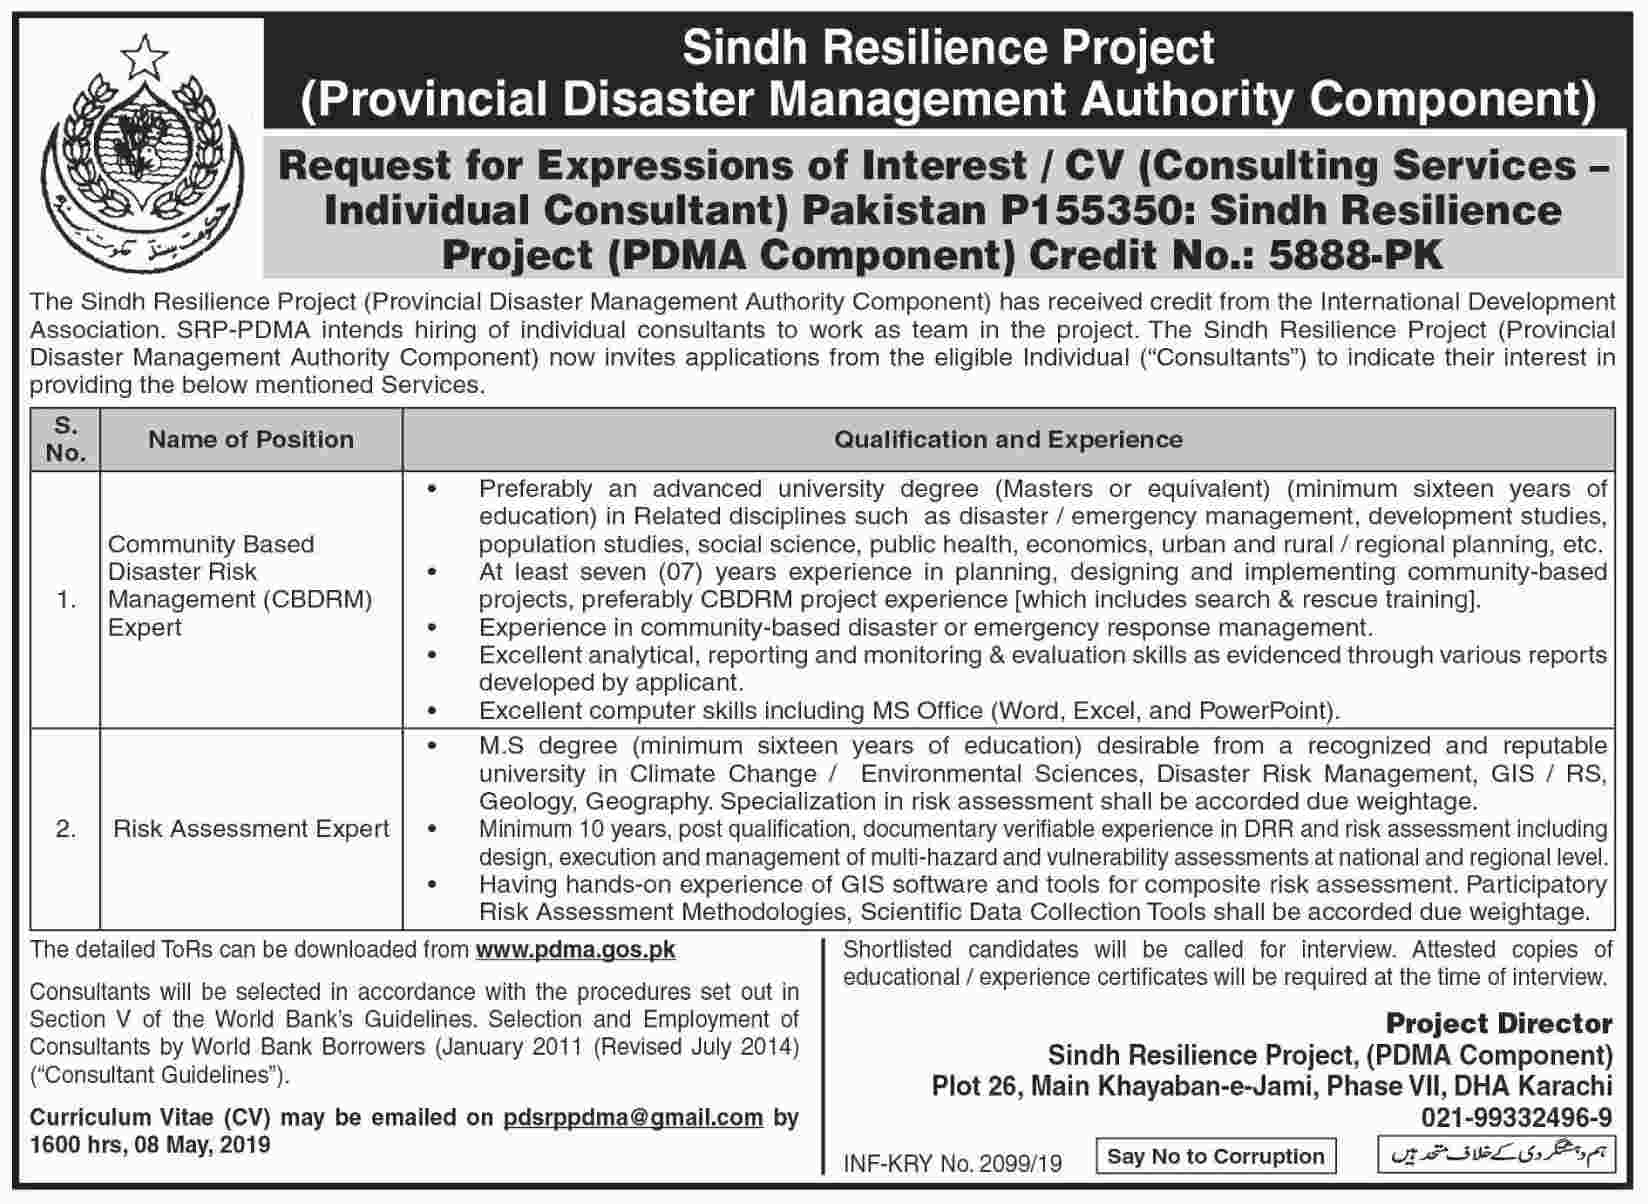 Provincial Disaster Management Authority jobs 2019